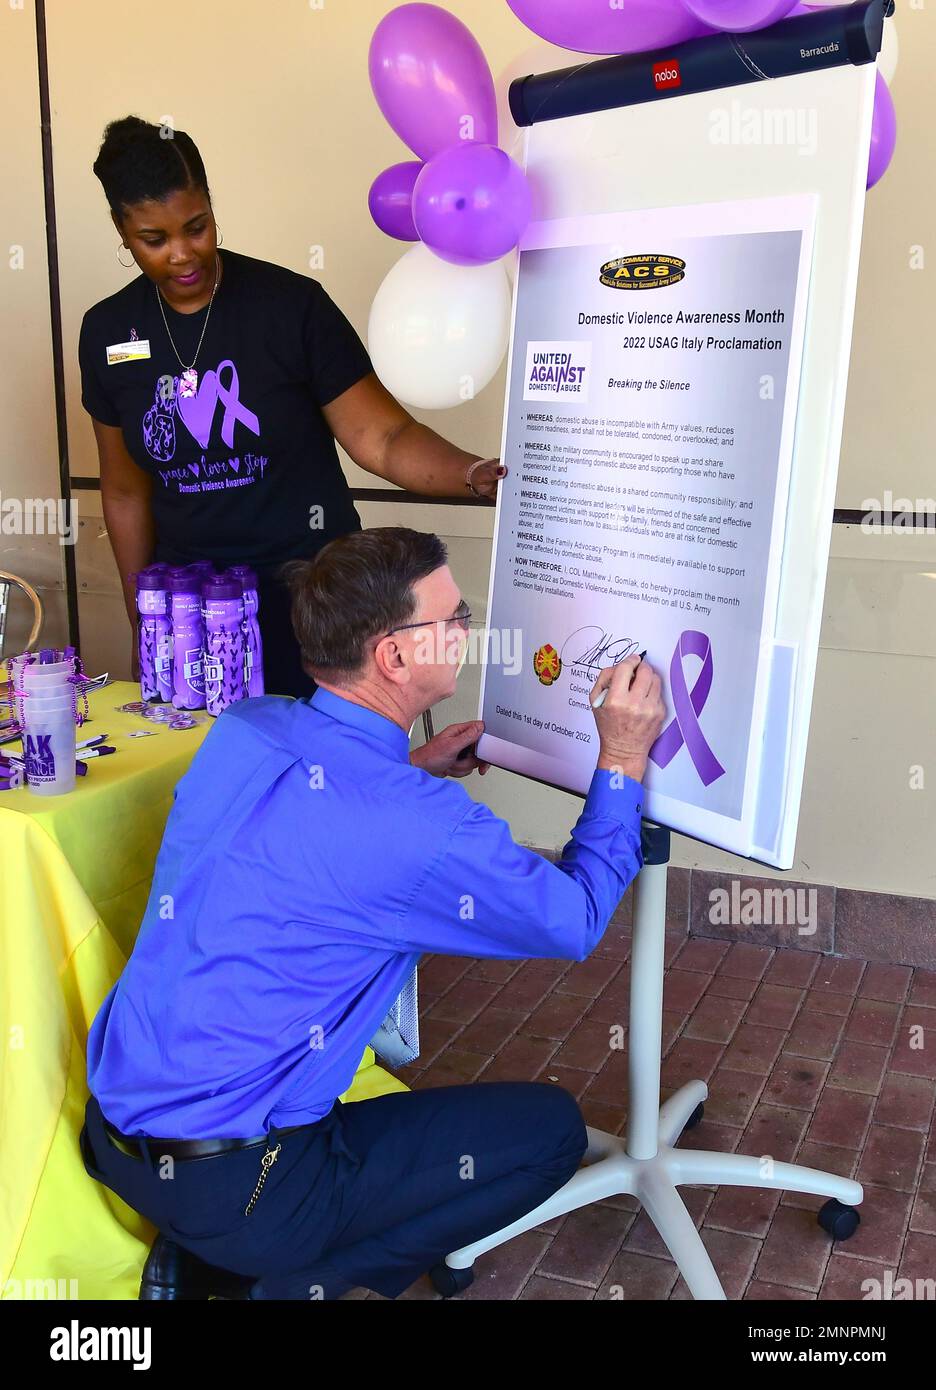 Monthlong Purple Ribbon Campaign to Raise Domestic Violence Awareness